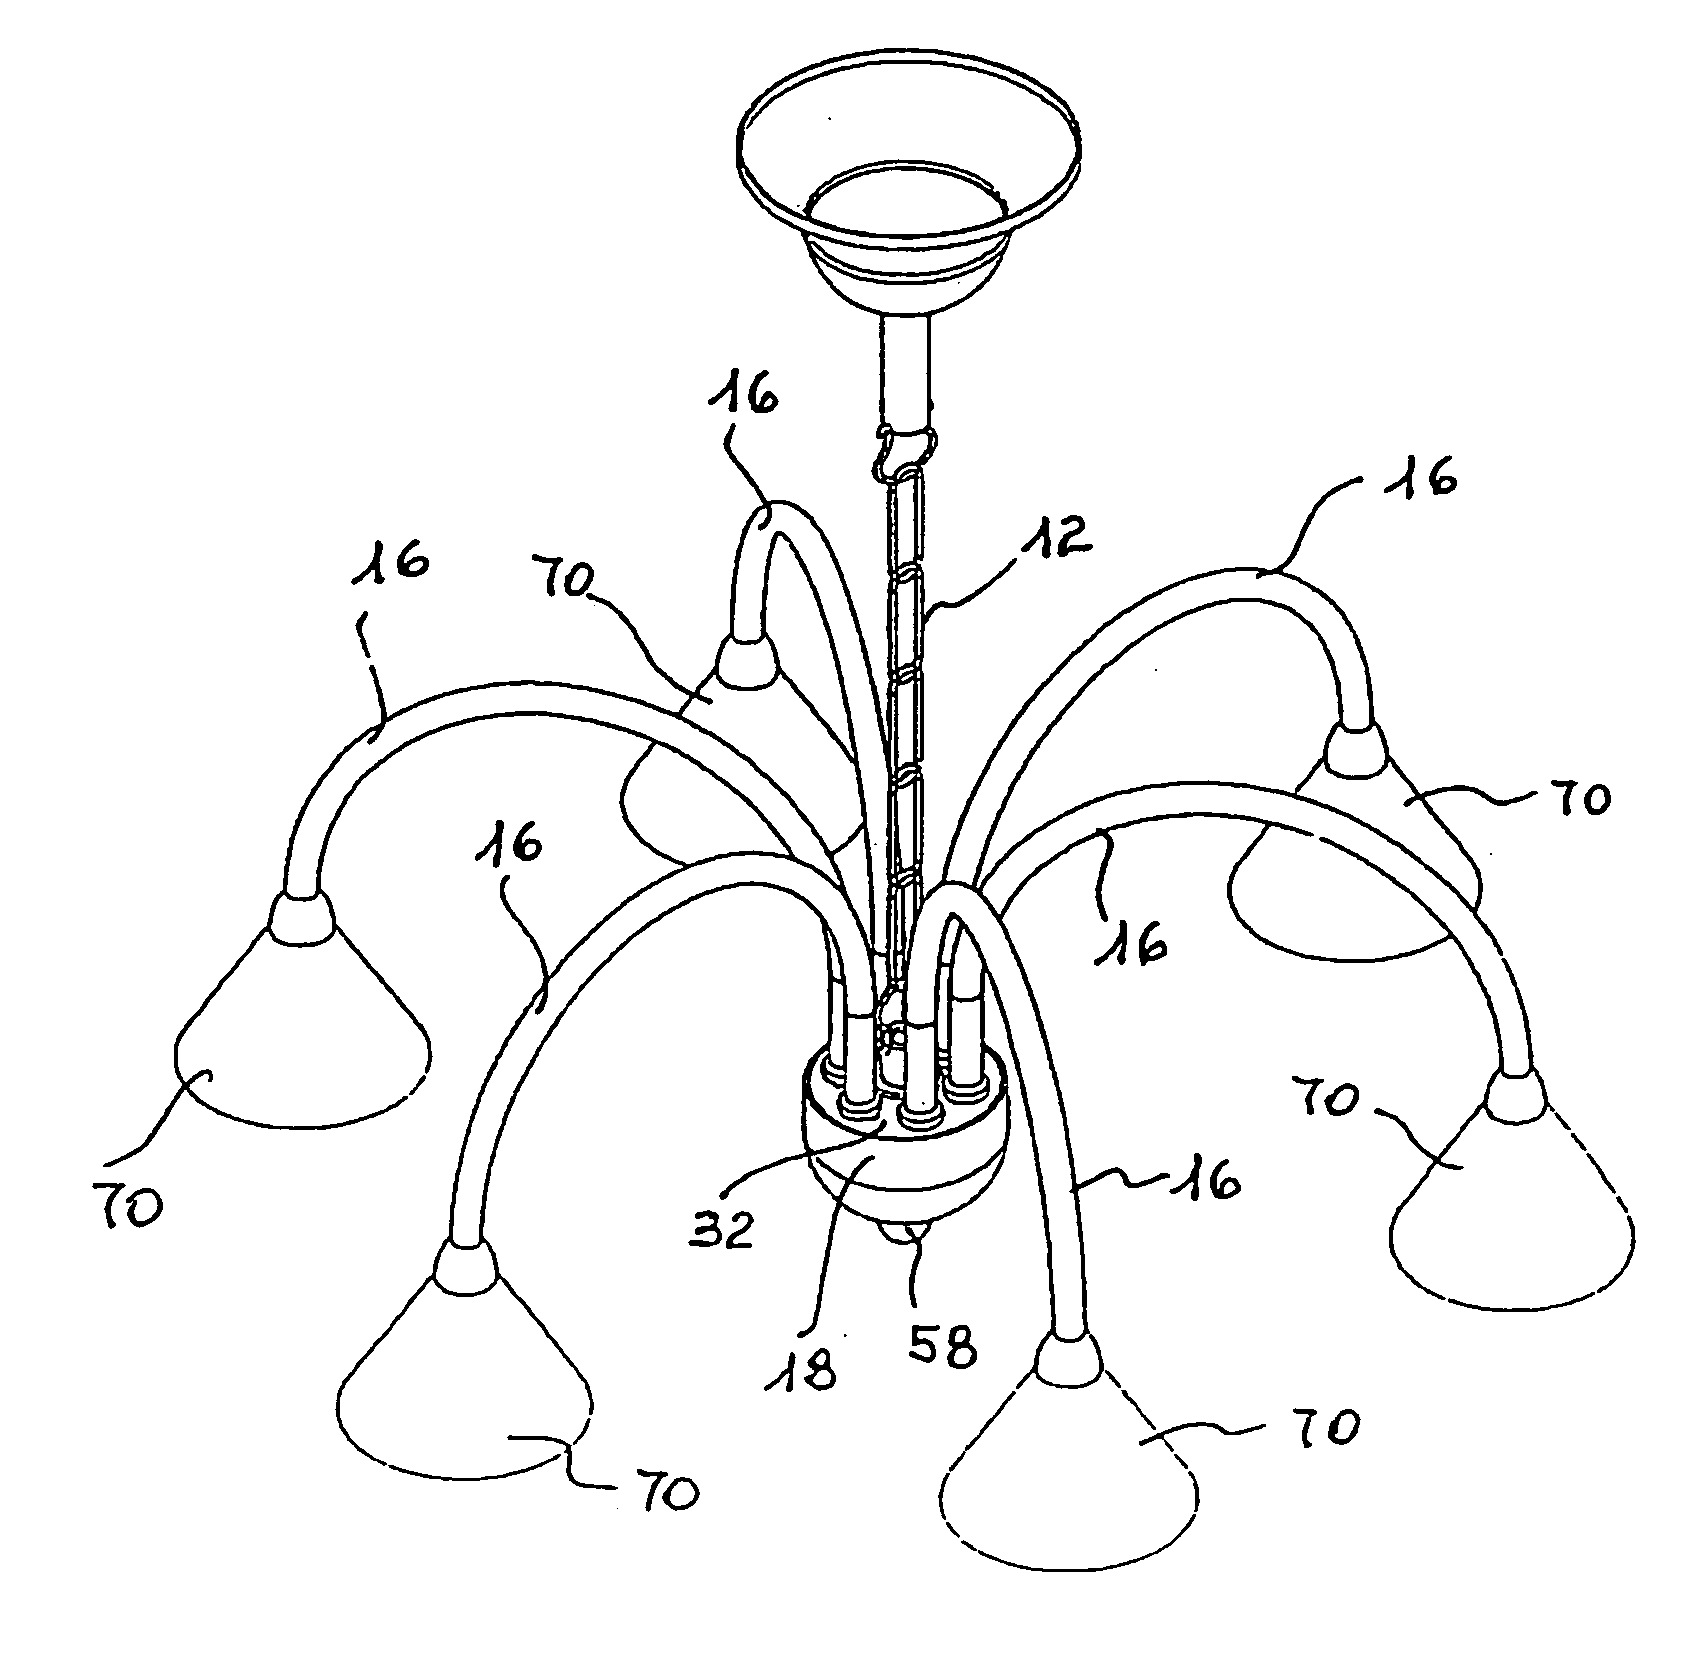 Modular lighting fixture with improved device for connecting the arms to the respective support